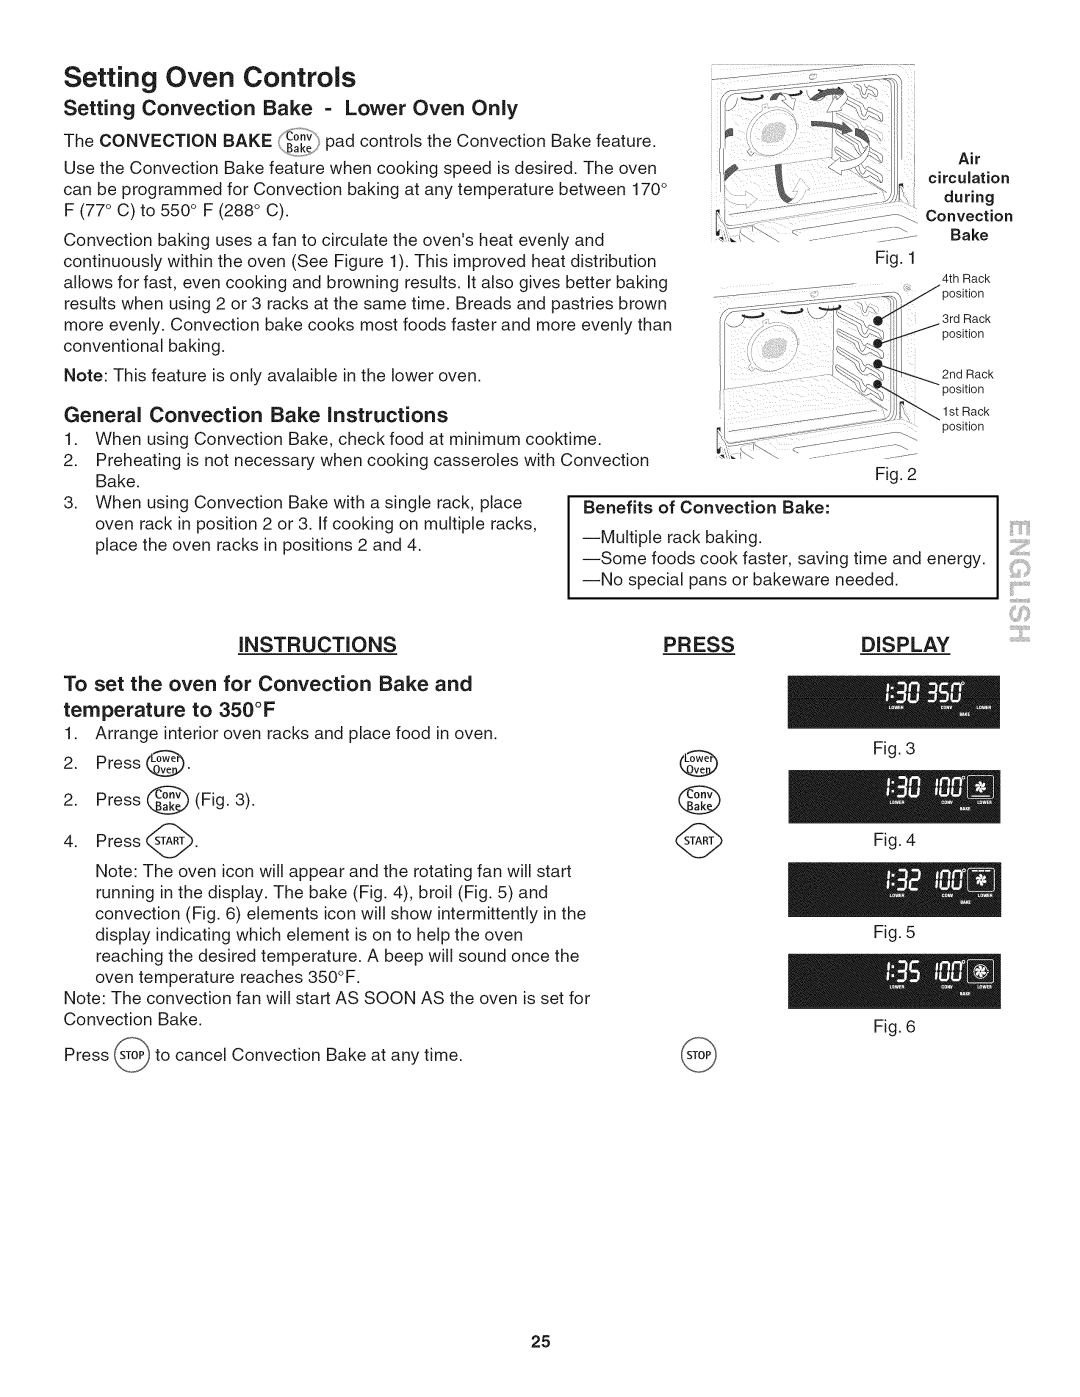 Kenmore 790. 9802 Setting Oven Controls, Setting Convection Bake - Lower Oven Only, General Convection Bake Instructions 